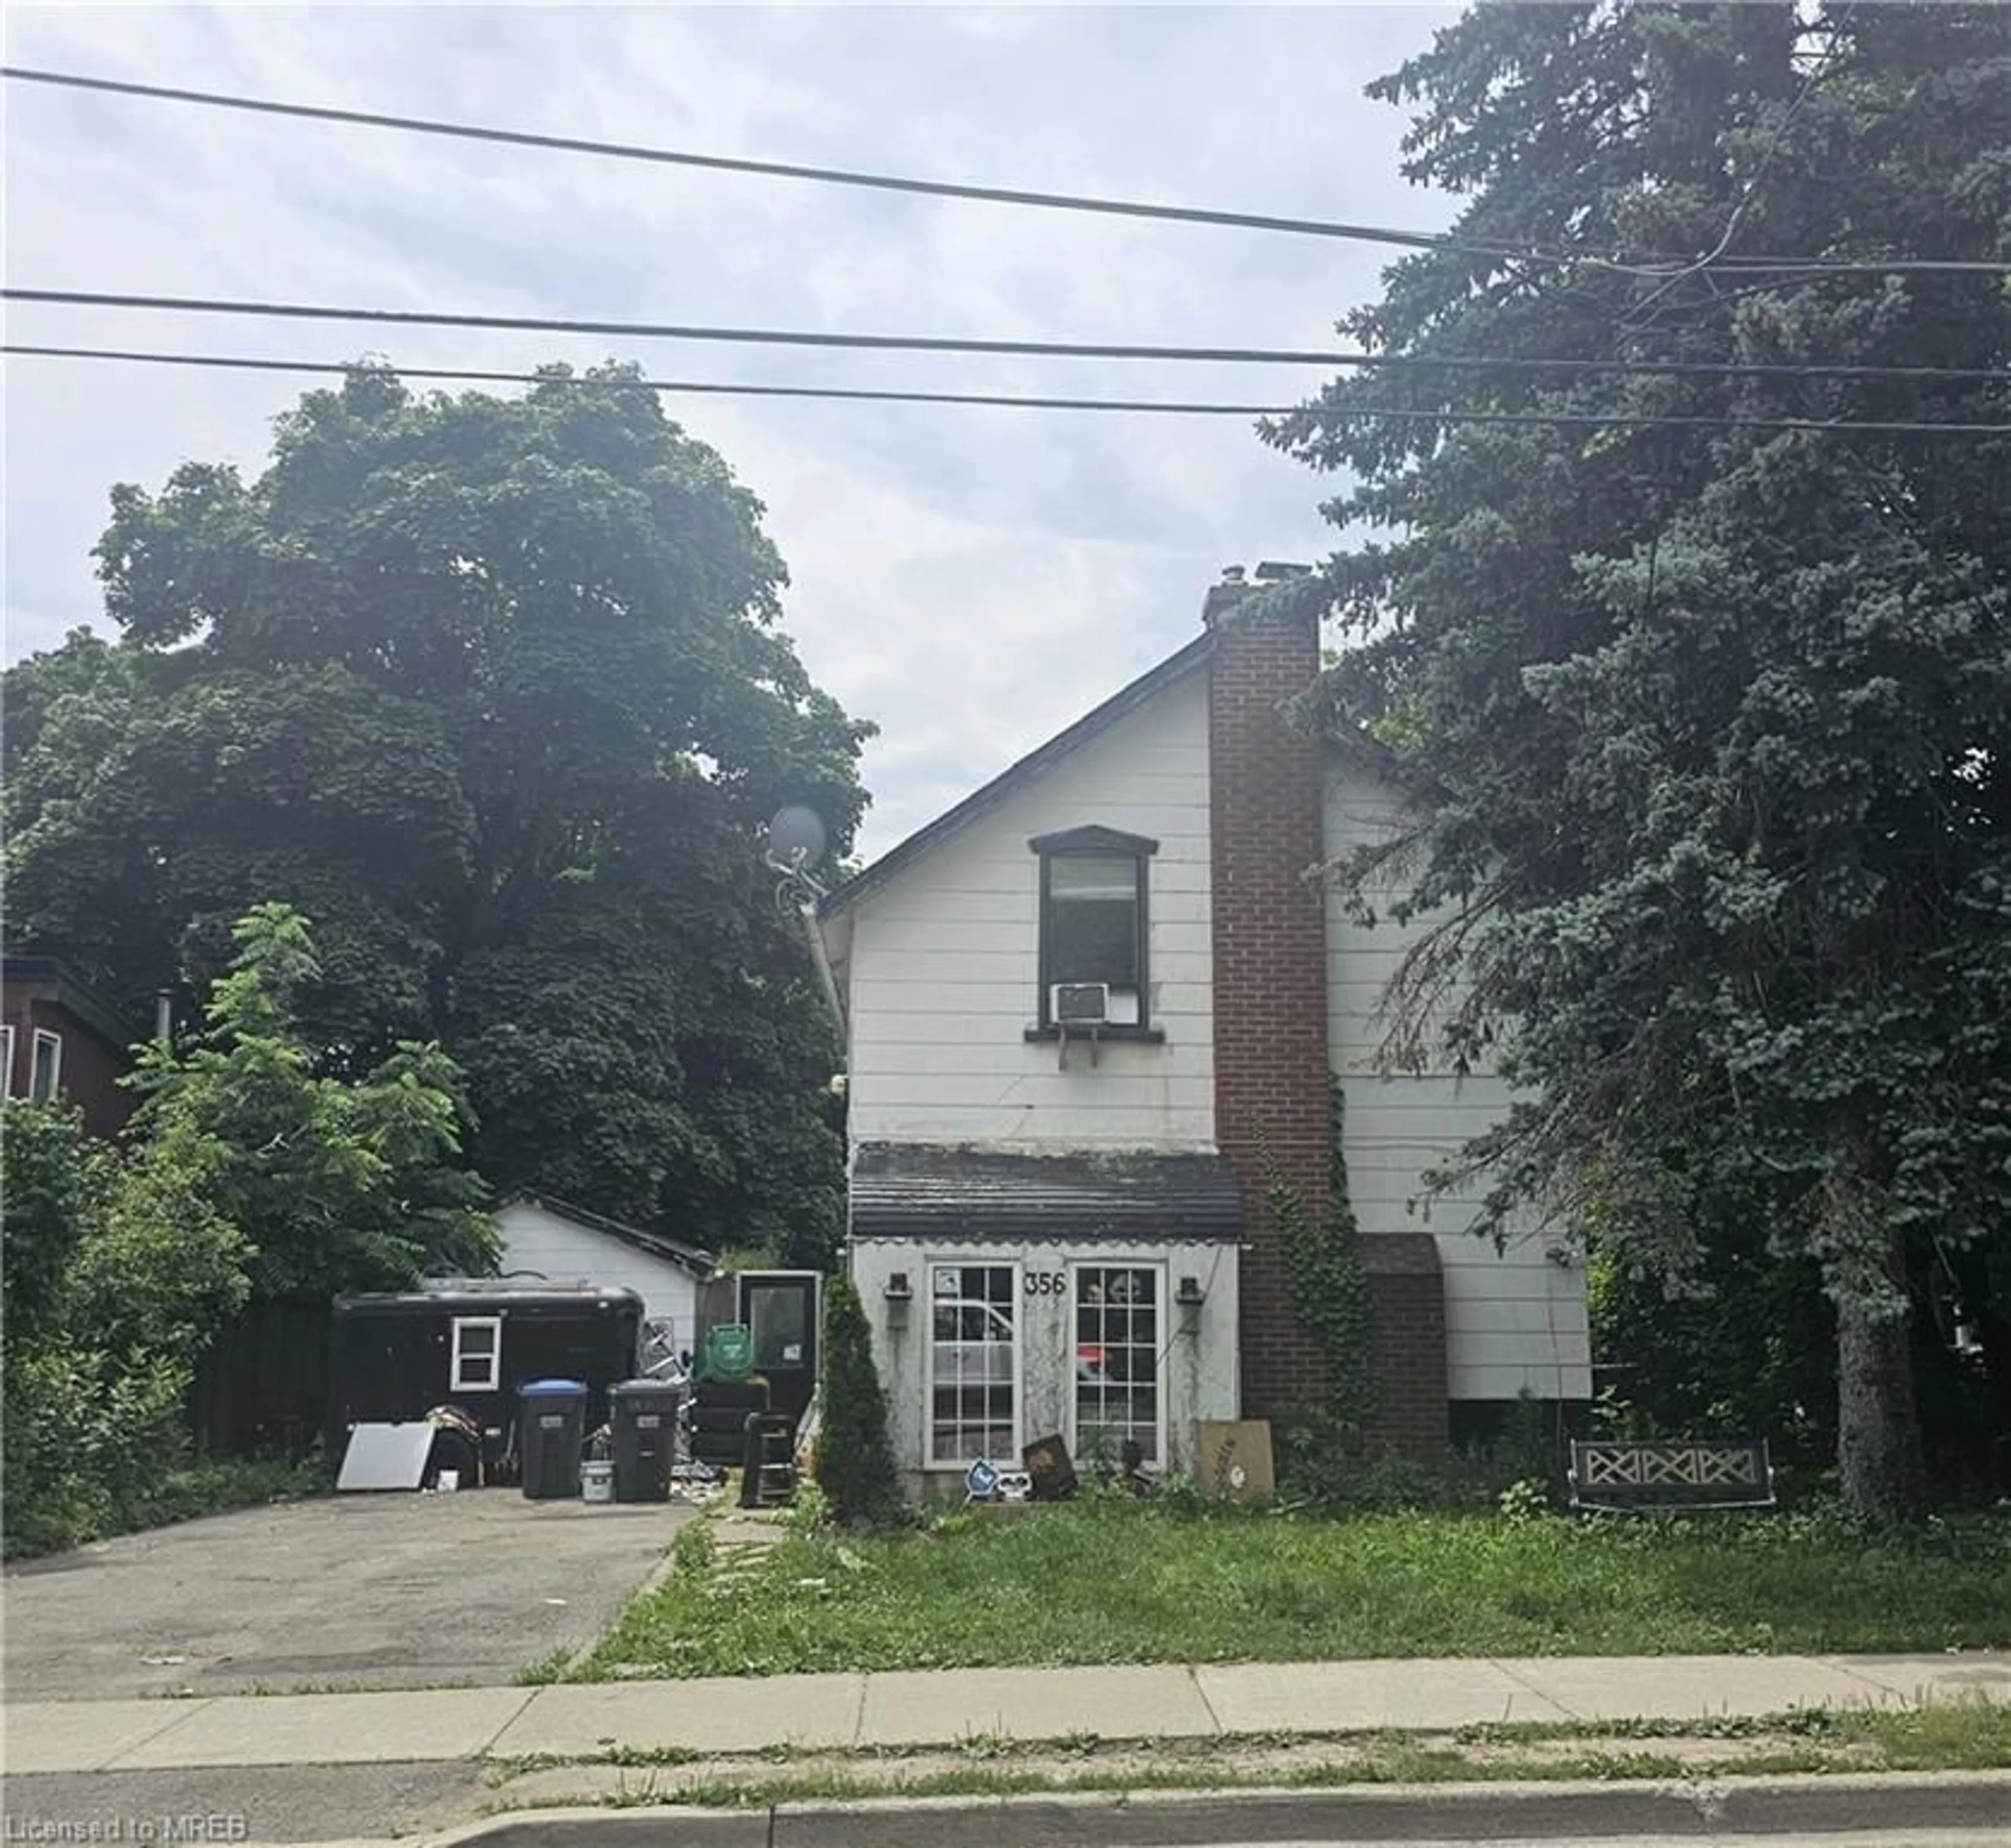 Frontside or backside of a home for 356 Queen St, Mississauga Ontario L5M 1M2